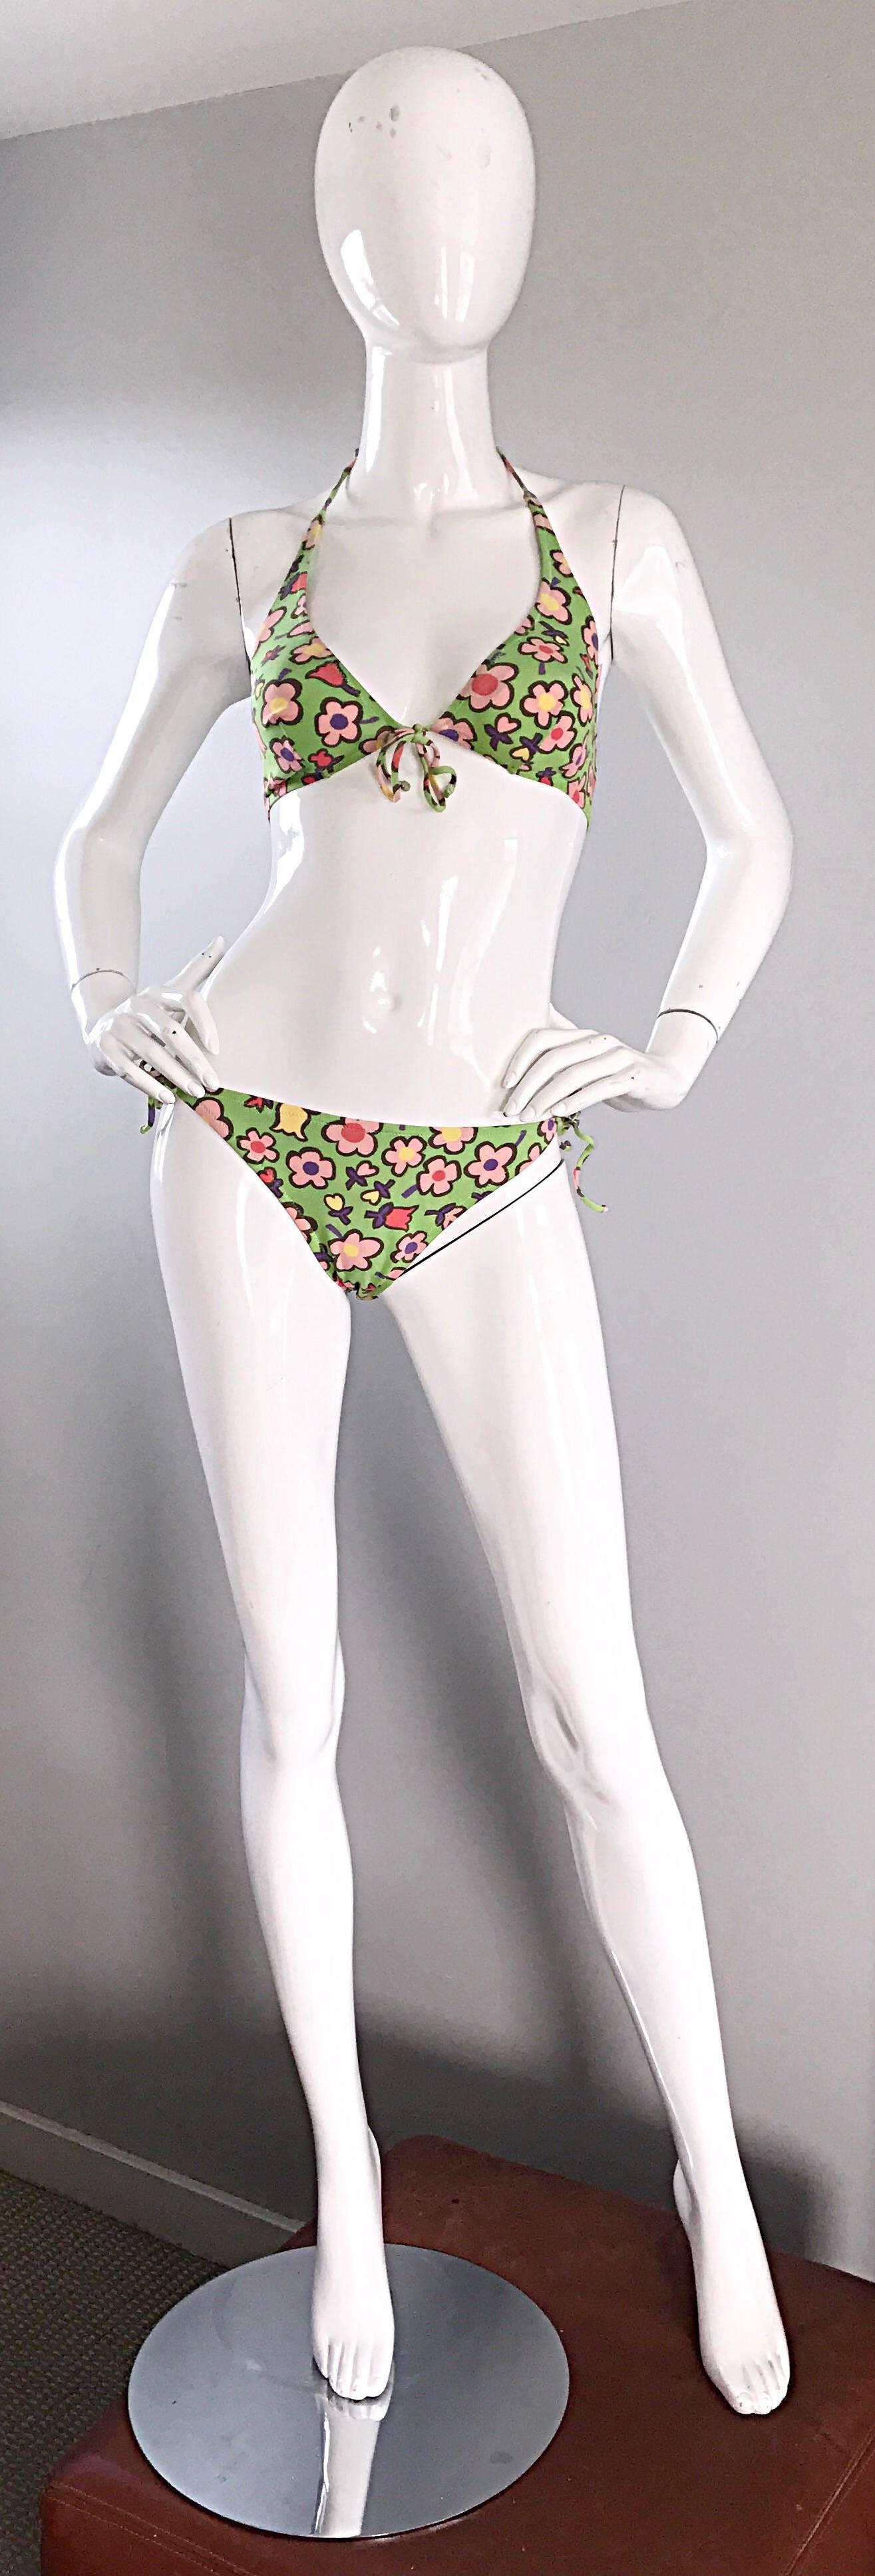 Sexy new vintage MOSCHINO bright neon green 90s swimsuit ! Features colorful flowers printed in pink, fuchsia, yellow, and purple. Ties at each side of the waist, and at front bust. Super flattering string bikini great for the pool or beach! In